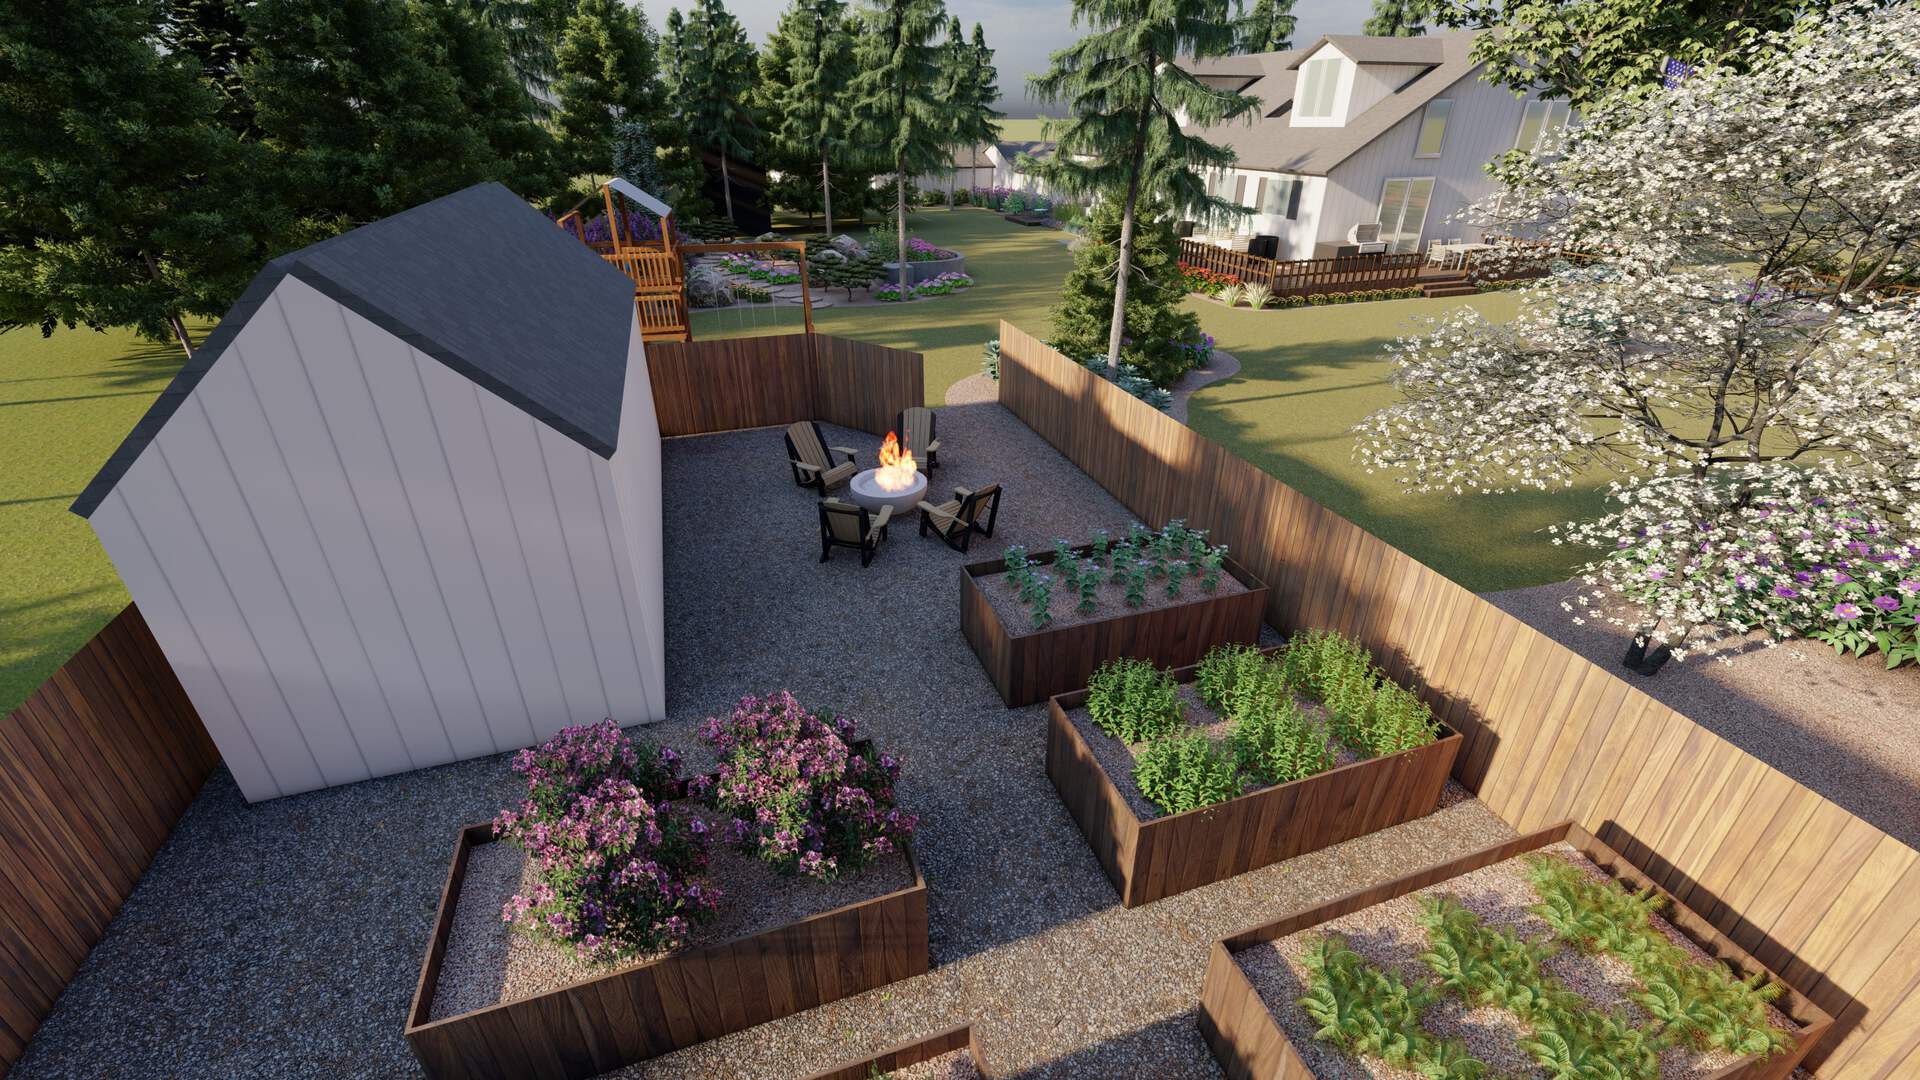 backyard landscaping ideas in Denver with raised garden beds and a fire pit area next to a shed